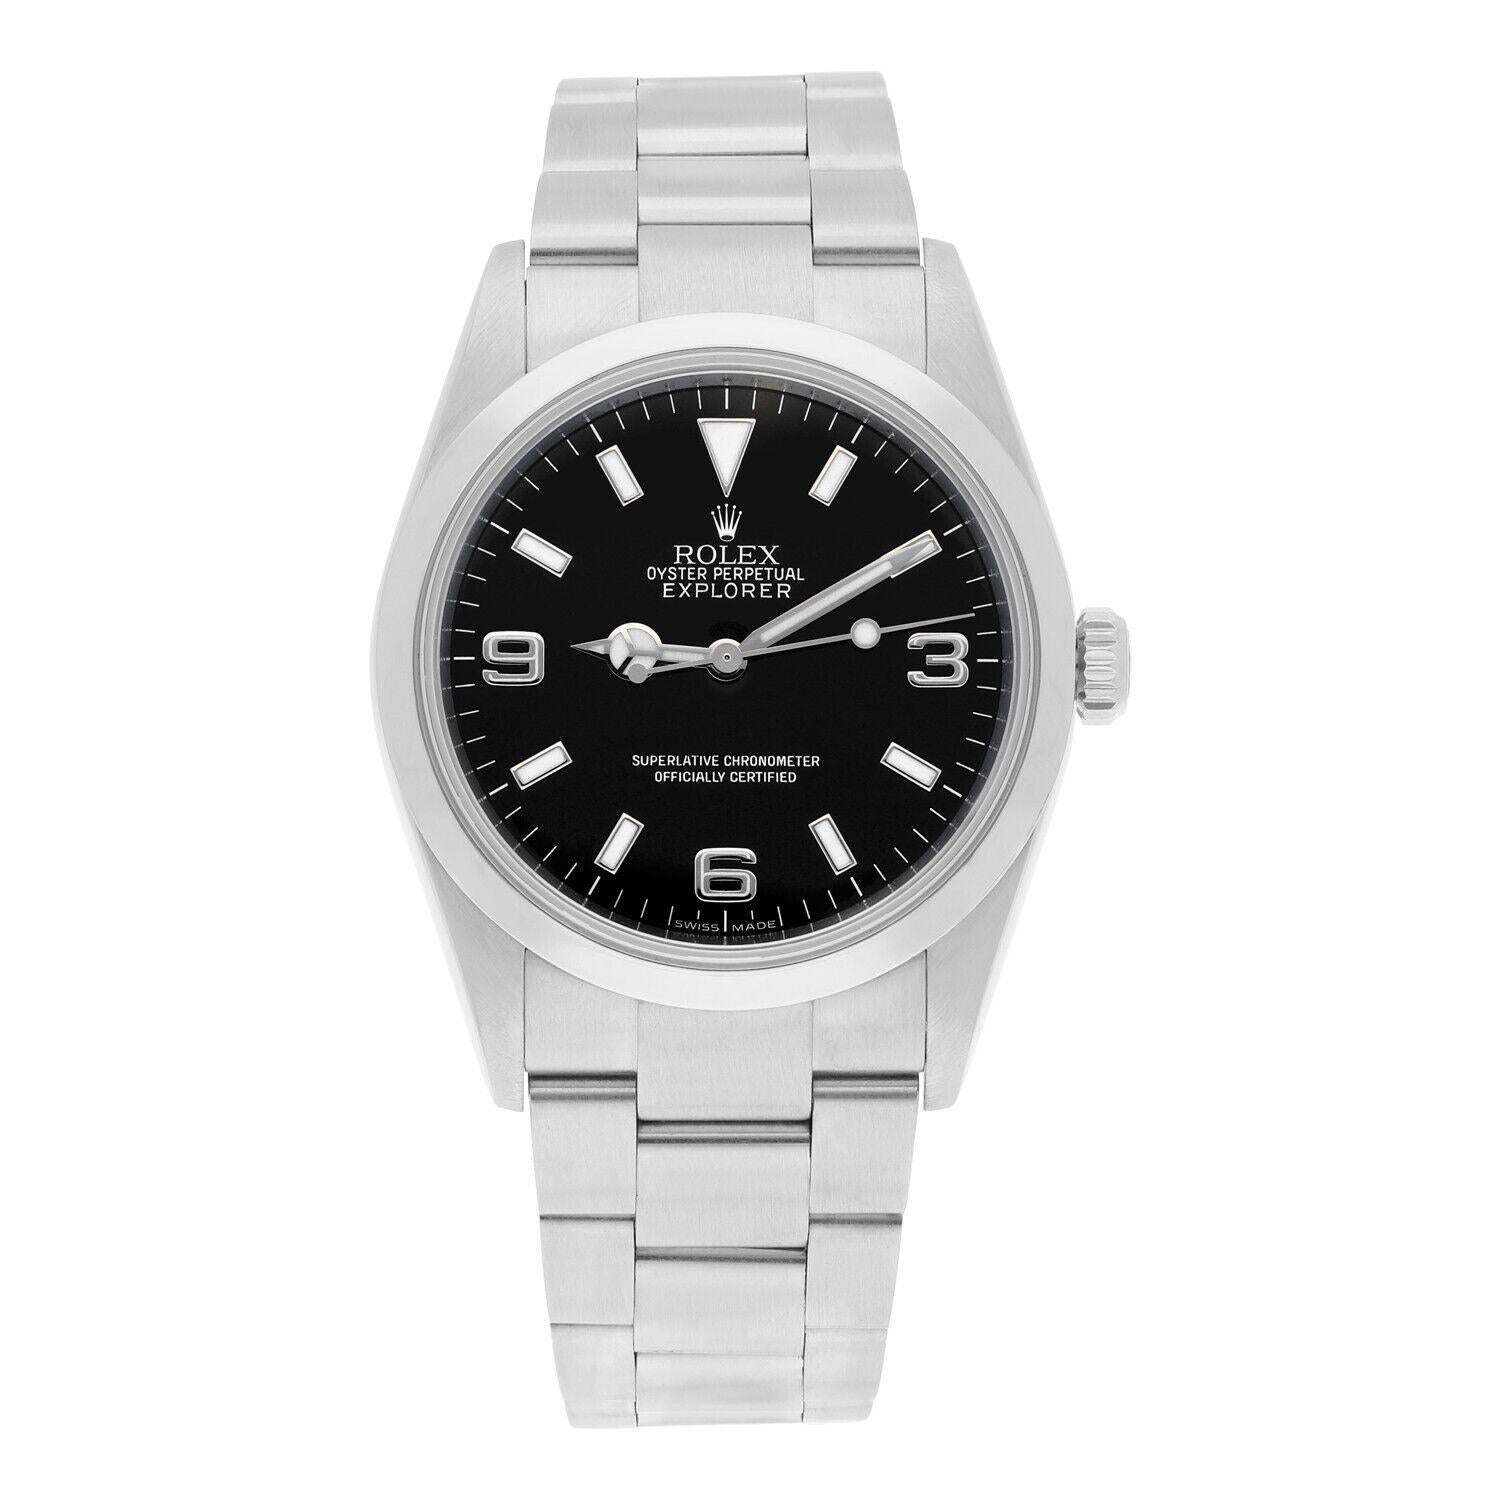 Rolex Explorer I Black 36mm 3-6-9 Stainless Steel Oyster Watch 114270 MINT circa 2007-2008
This watch has been professionally polished, serviced and is in excellent overall condition. There are absolutely no visible scratches or blemishes.